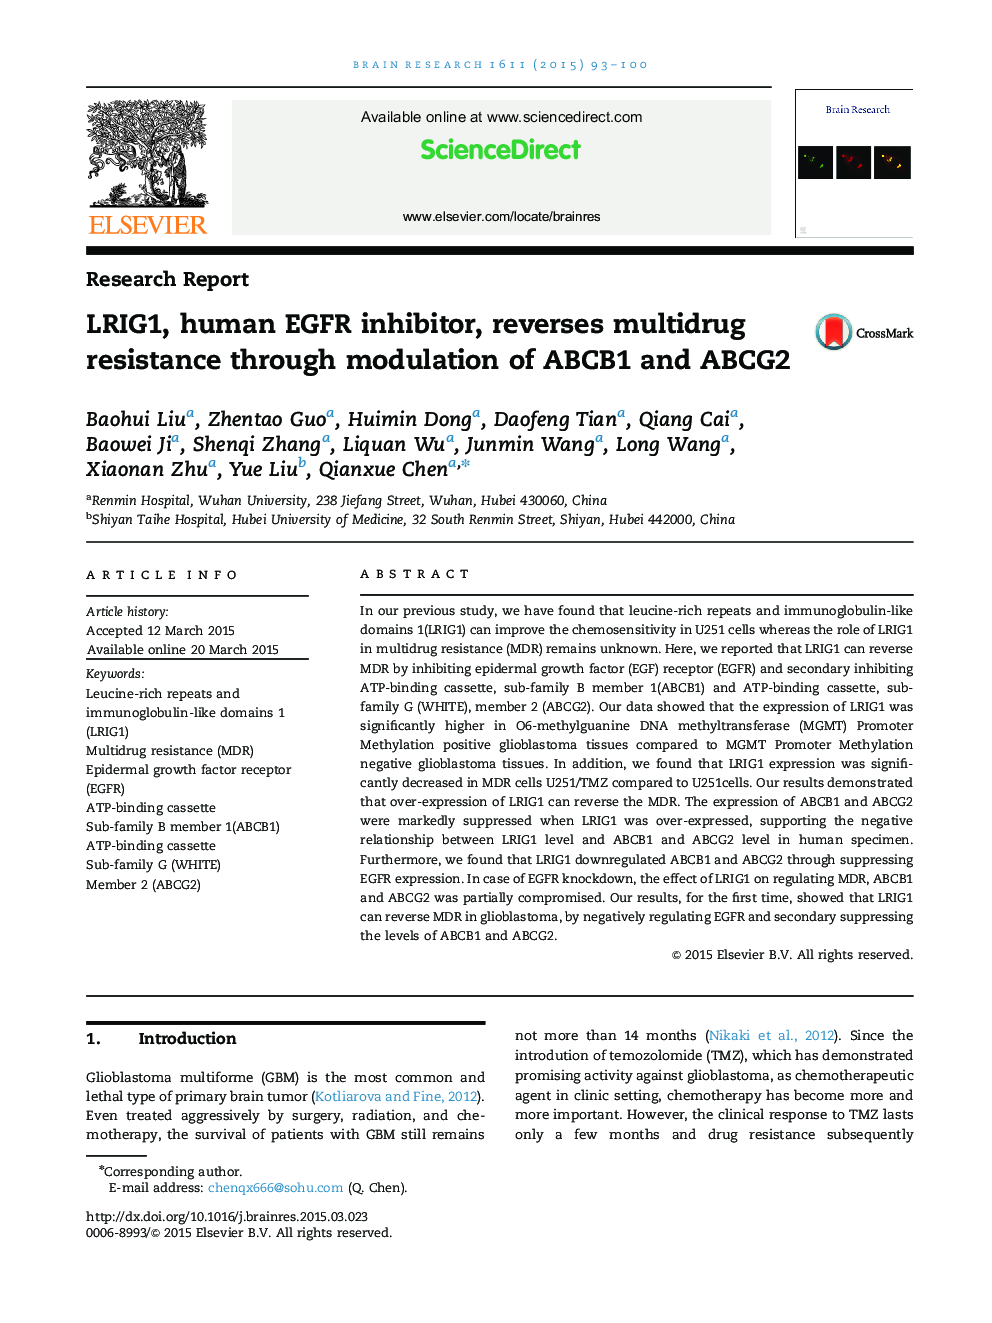 Research ReportLRIG1, human EGFR inhibitor, reverses multidrug resistance through modulation of ABCB1 and ABCG2